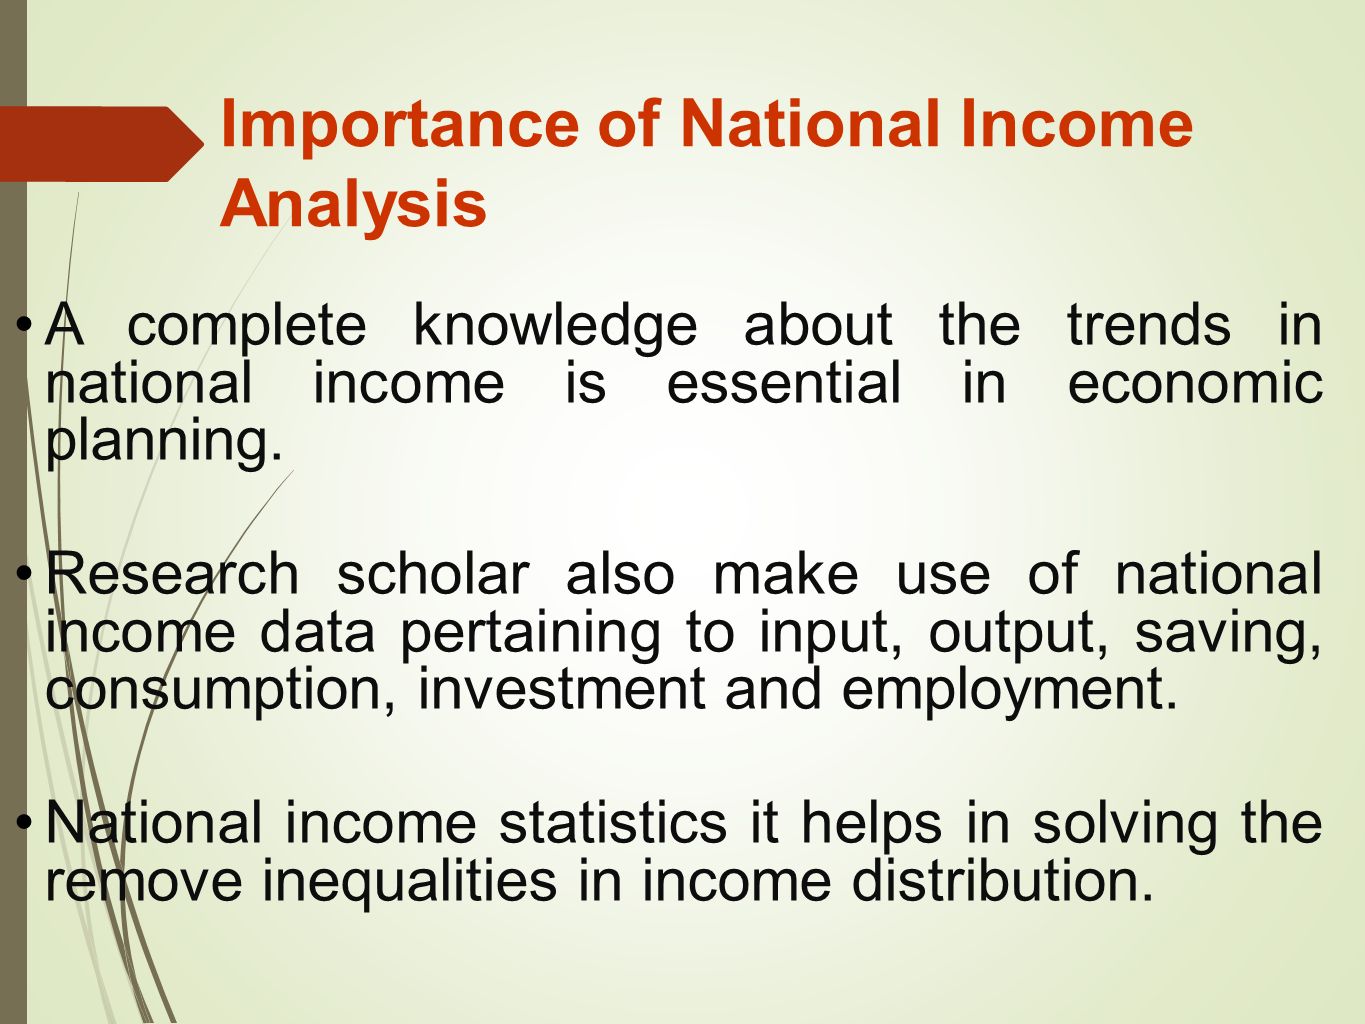 Reasons for Growing Importance of National Income Studies